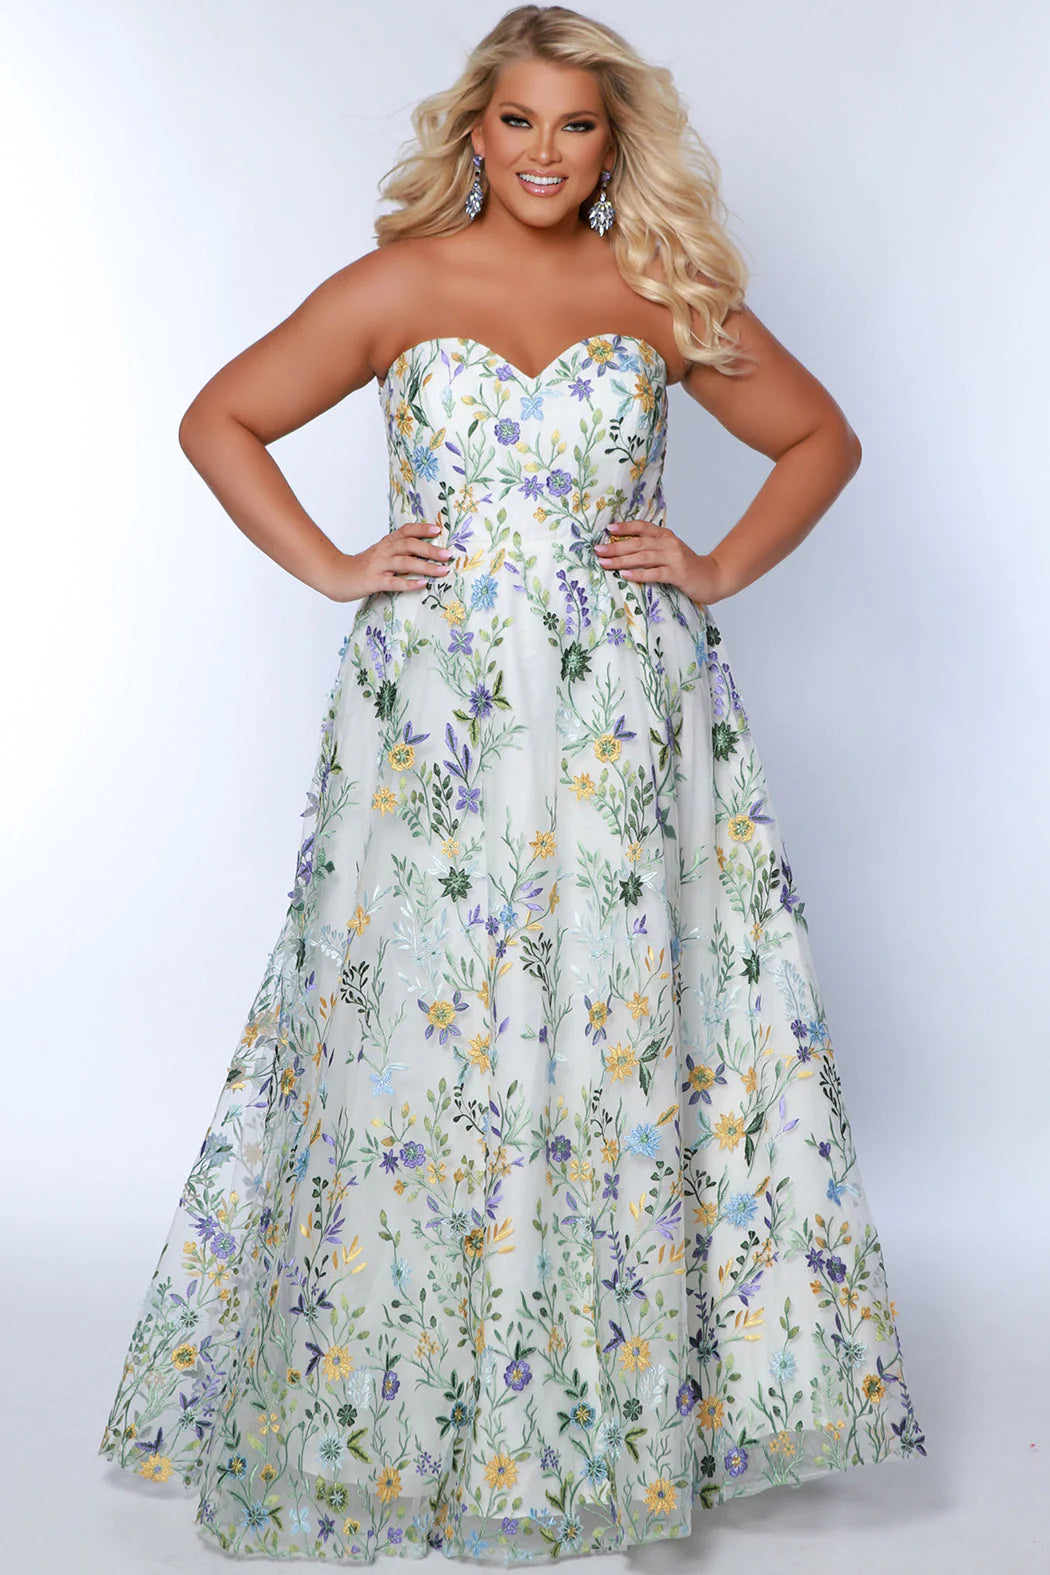 This Sydneys Closet SC7381 long prom dress is perfect for formal occasions or special evenings out. Featuring a plus size A-line silhouette, a sweetheart neckline, and a striking floral pattern, this stylish dress is sure to bring a touch of elegance and glamour to your look. Unleash your romantic side in our 'Watch Me Bloom' formal dress! 